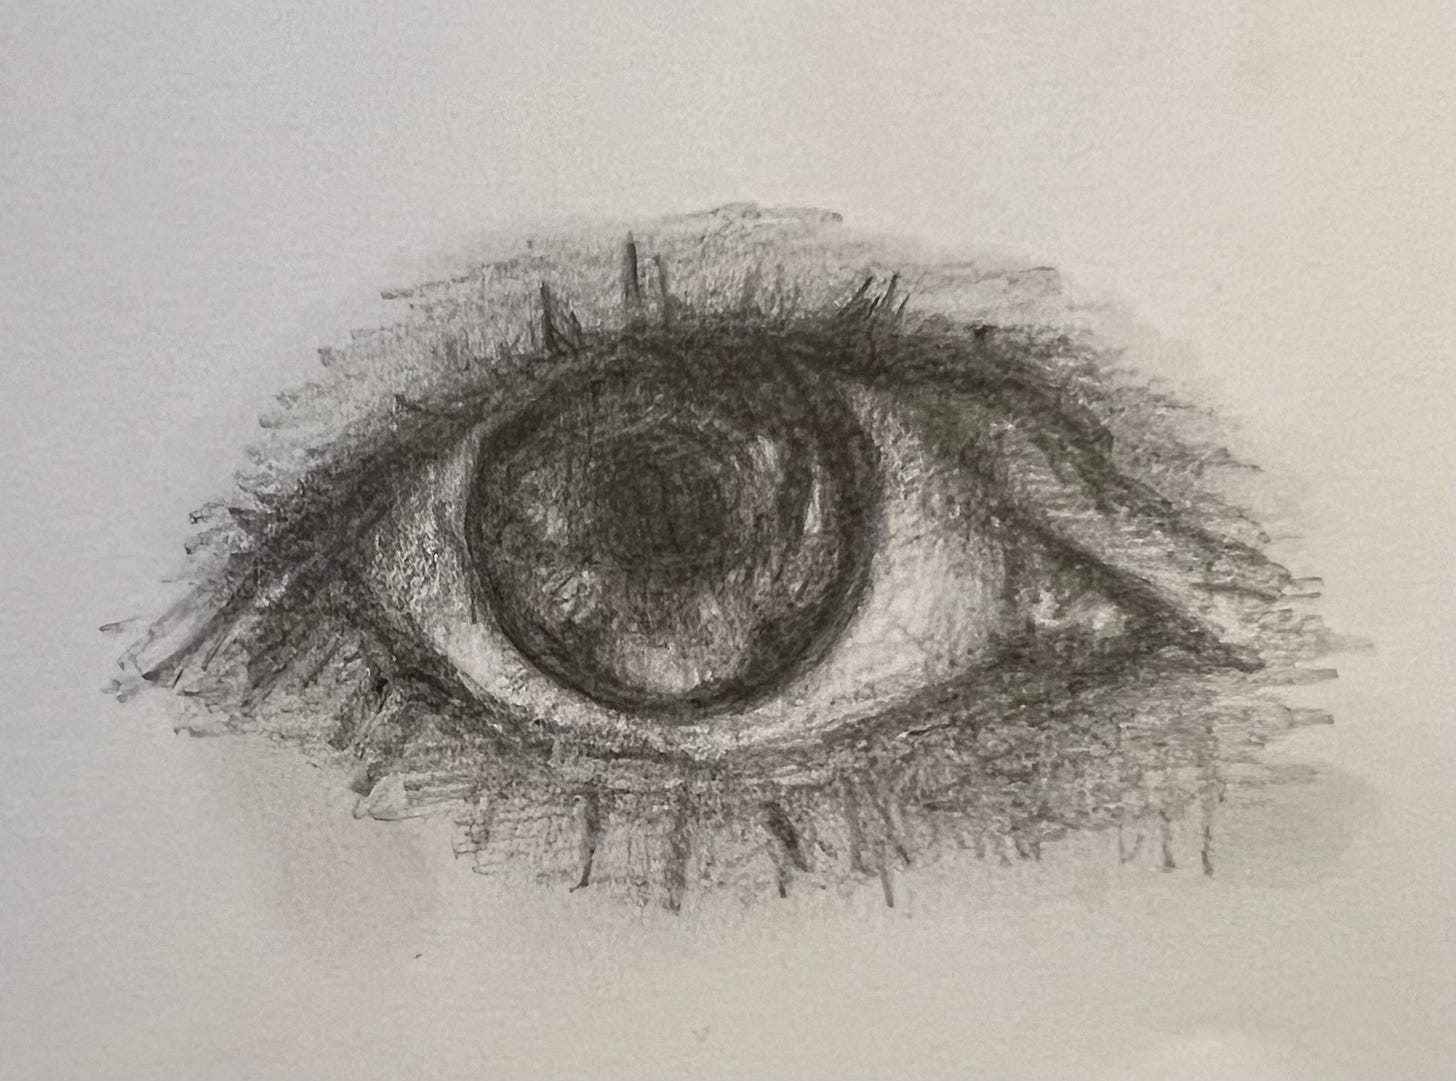 A sketched image of an eye.